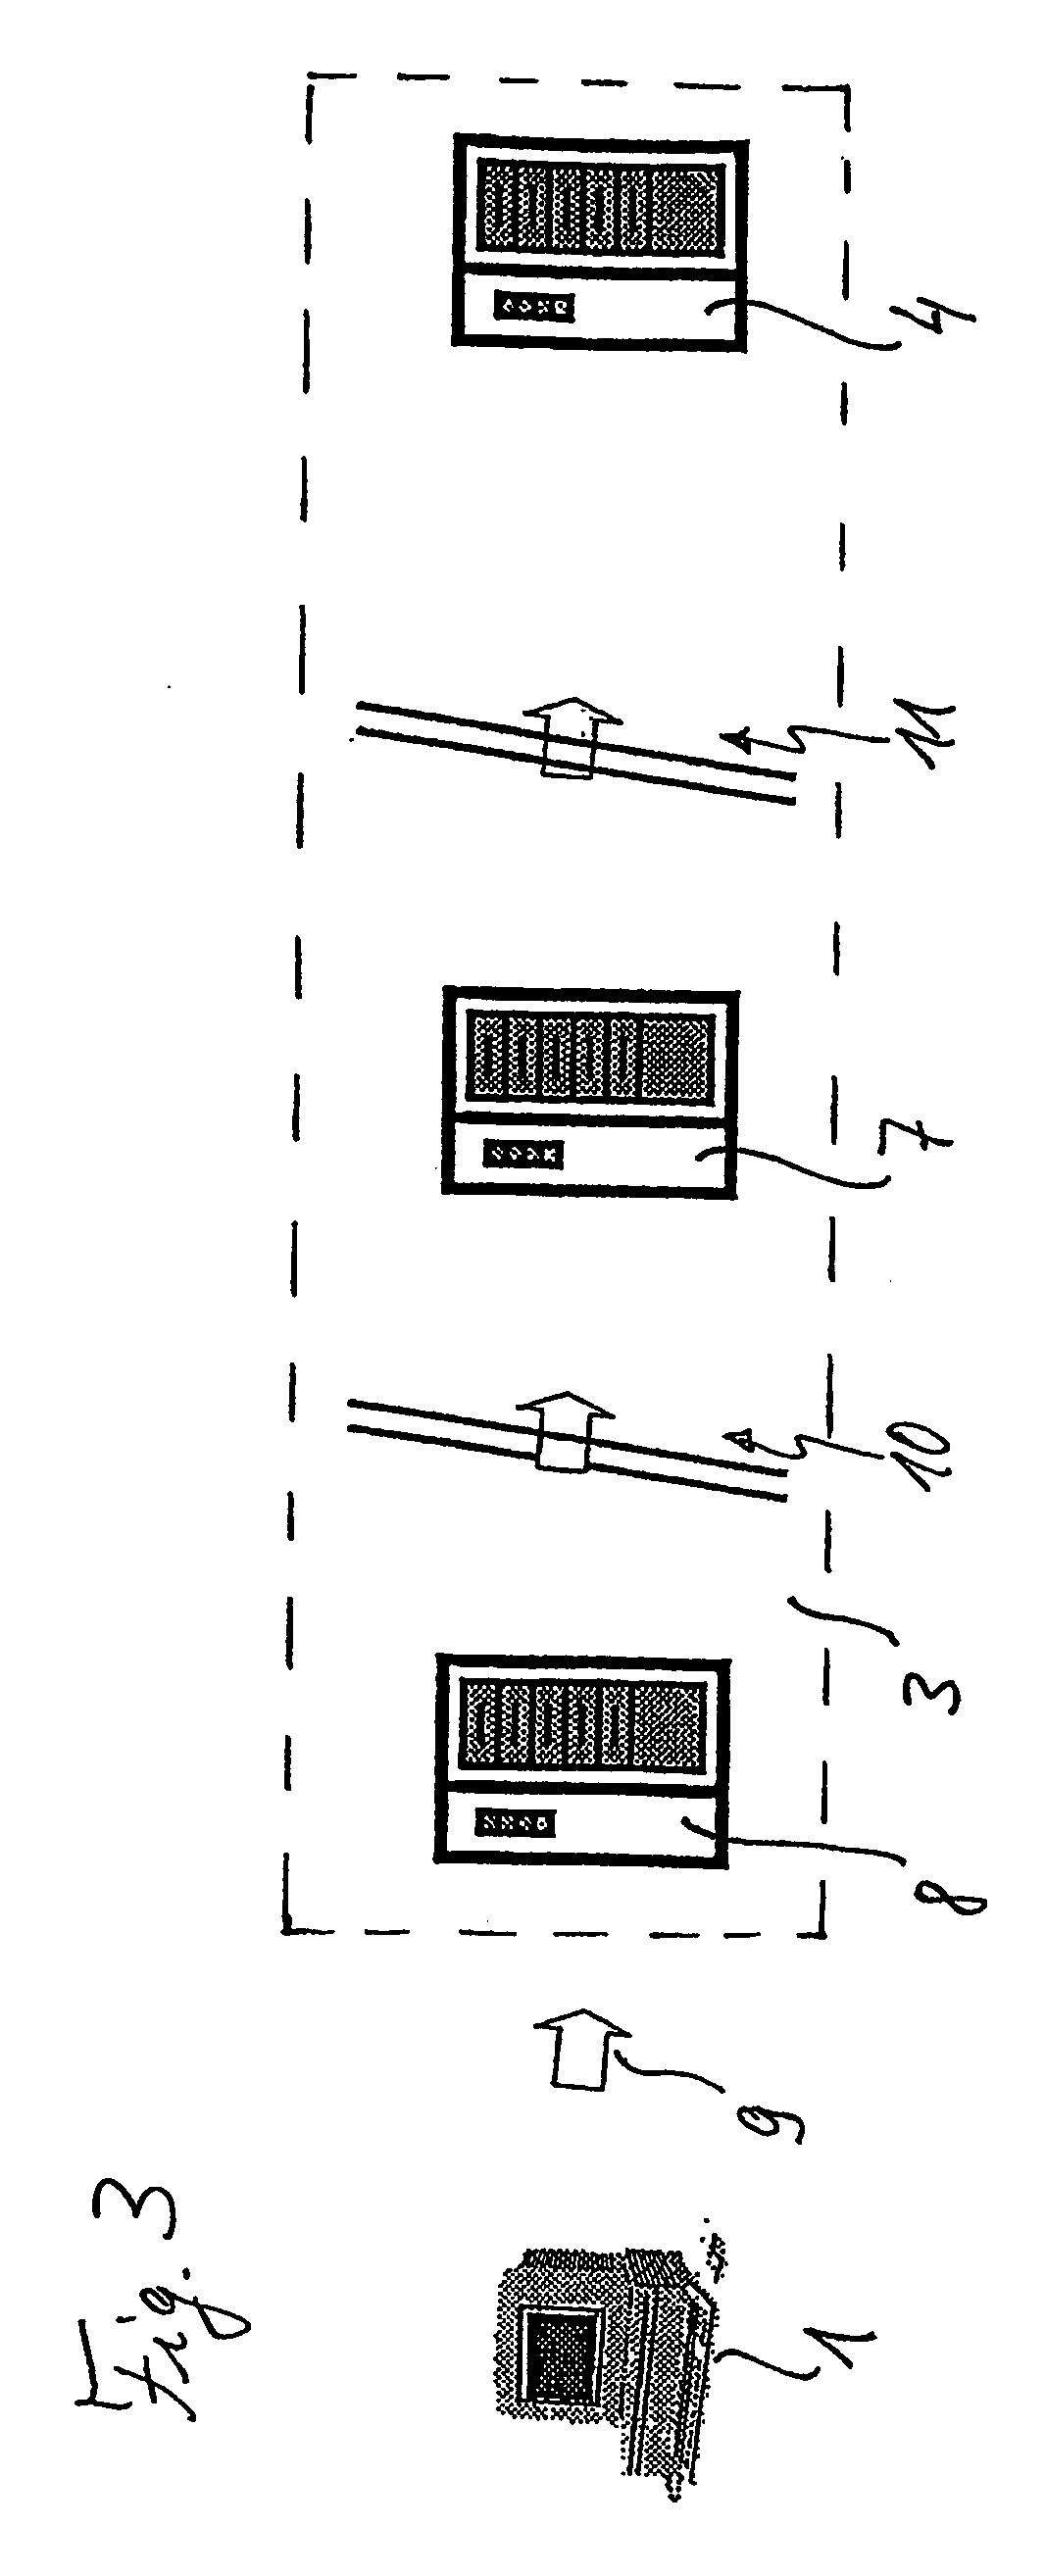 Data processing system for patent data